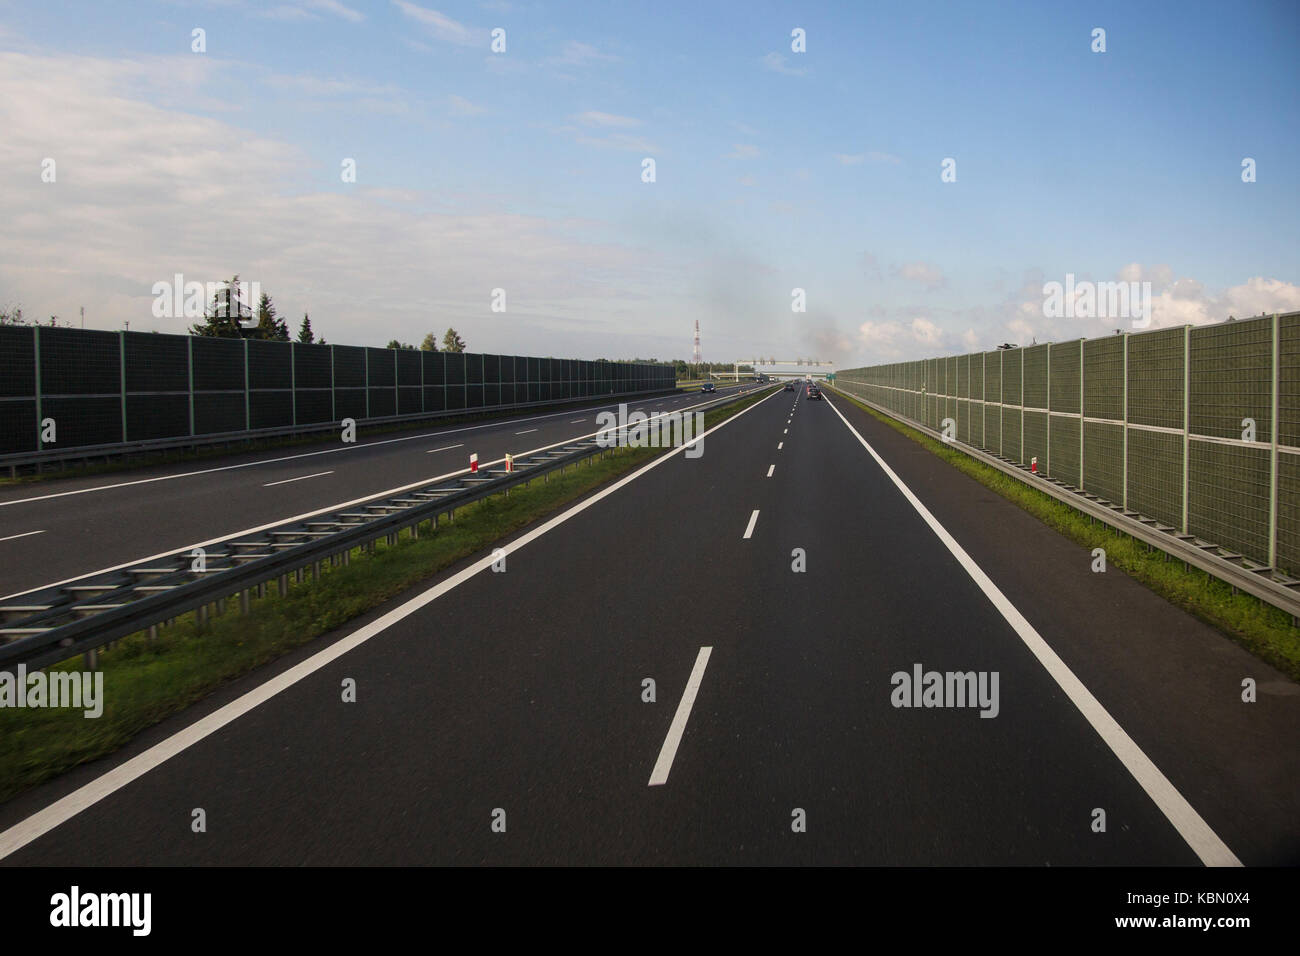 Perfect surface and soundproofing walls of modern highway Stock Photo